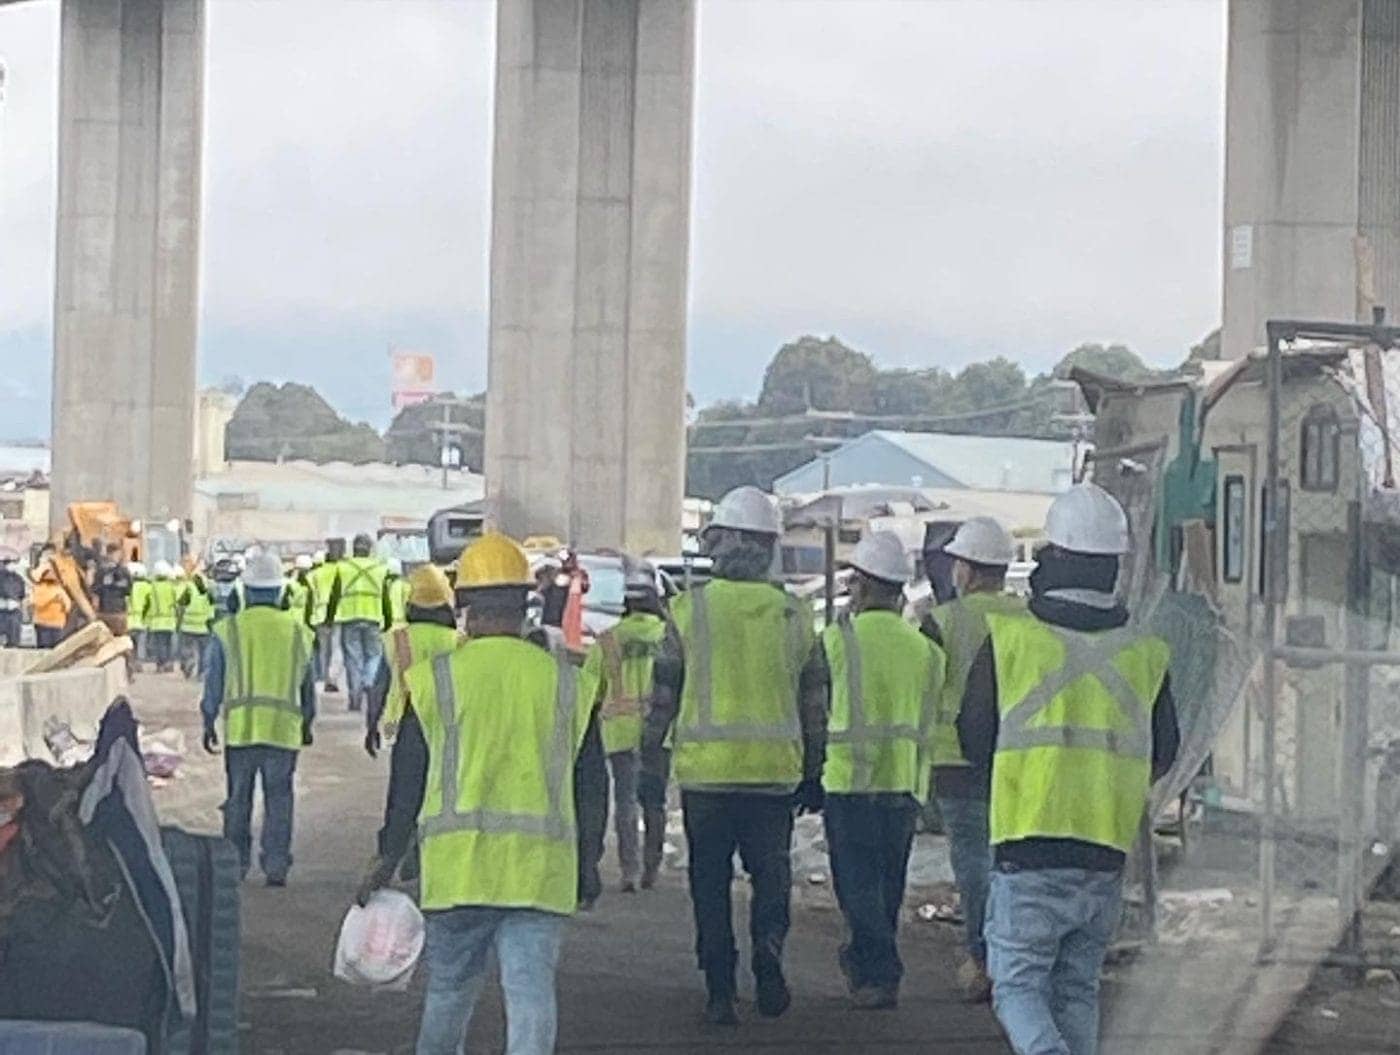 CalTrans-workers-evicting-Wood-Street-people-in-Oakland-by-Tiny-1400x1055, From Wood Street to where do we go?, Local News & Views News & Views 